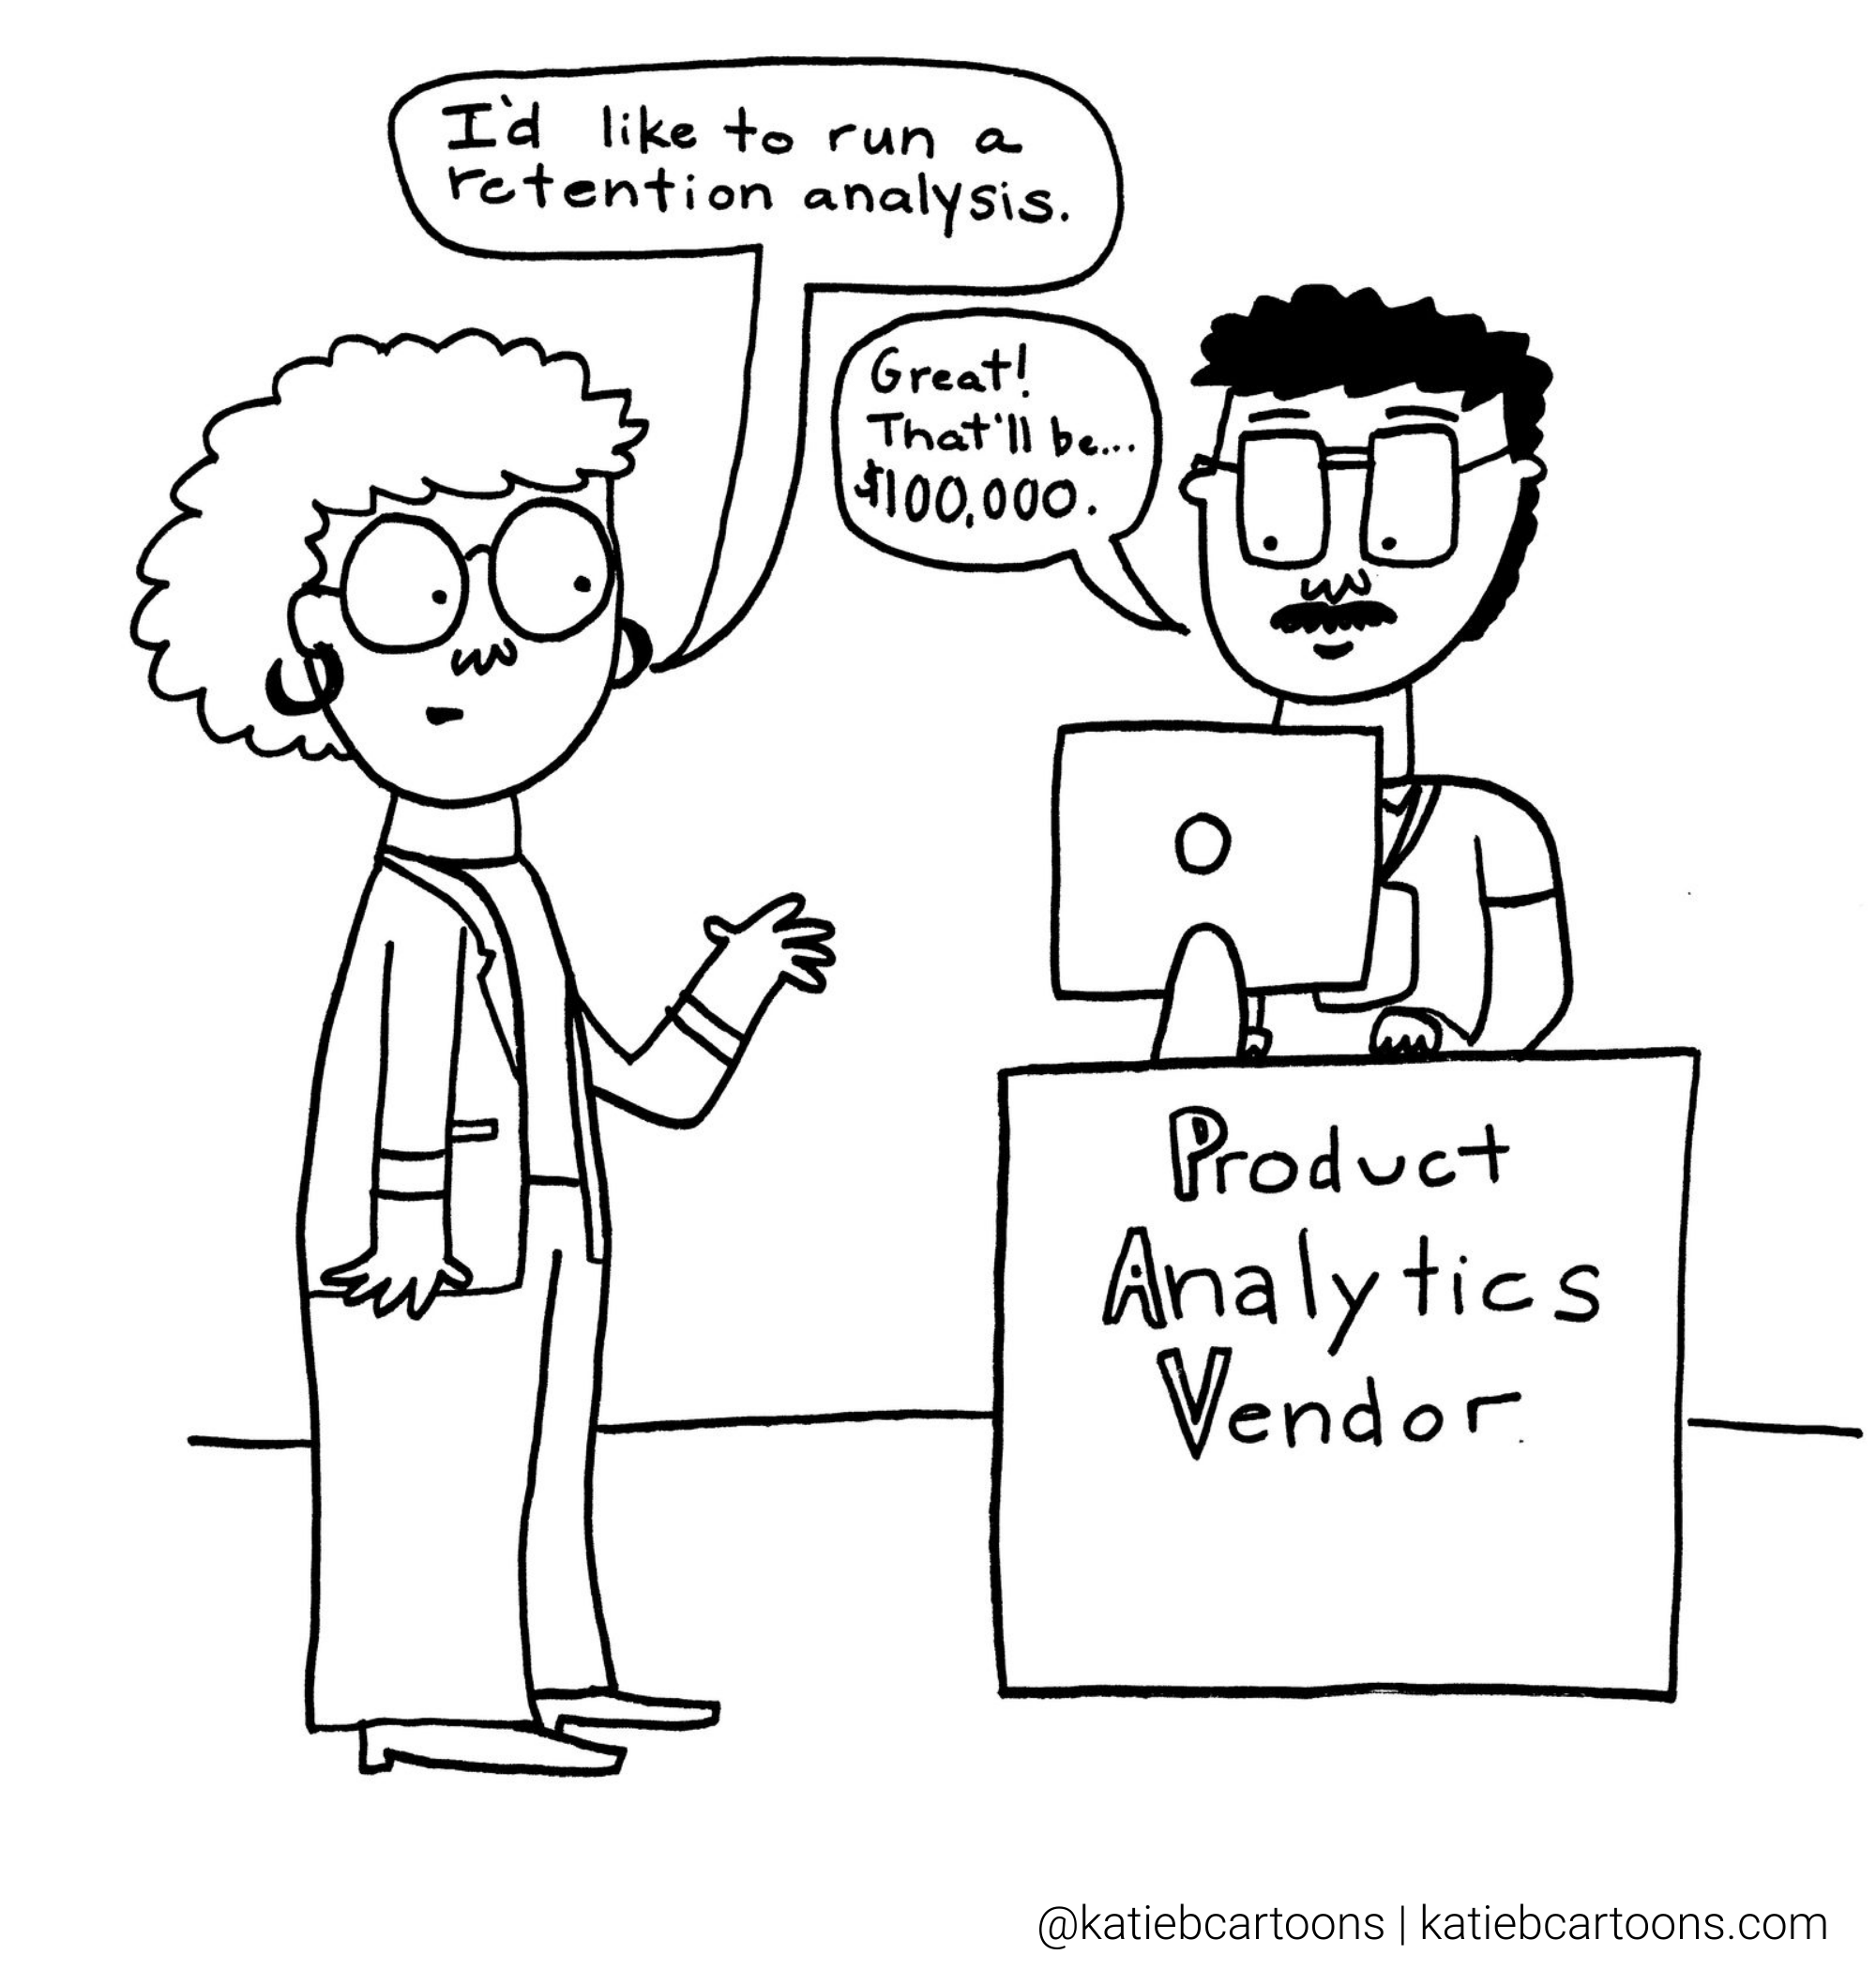 A cartoon of a woman being quoted $100K to run a retention analysis in a product analytics tool.